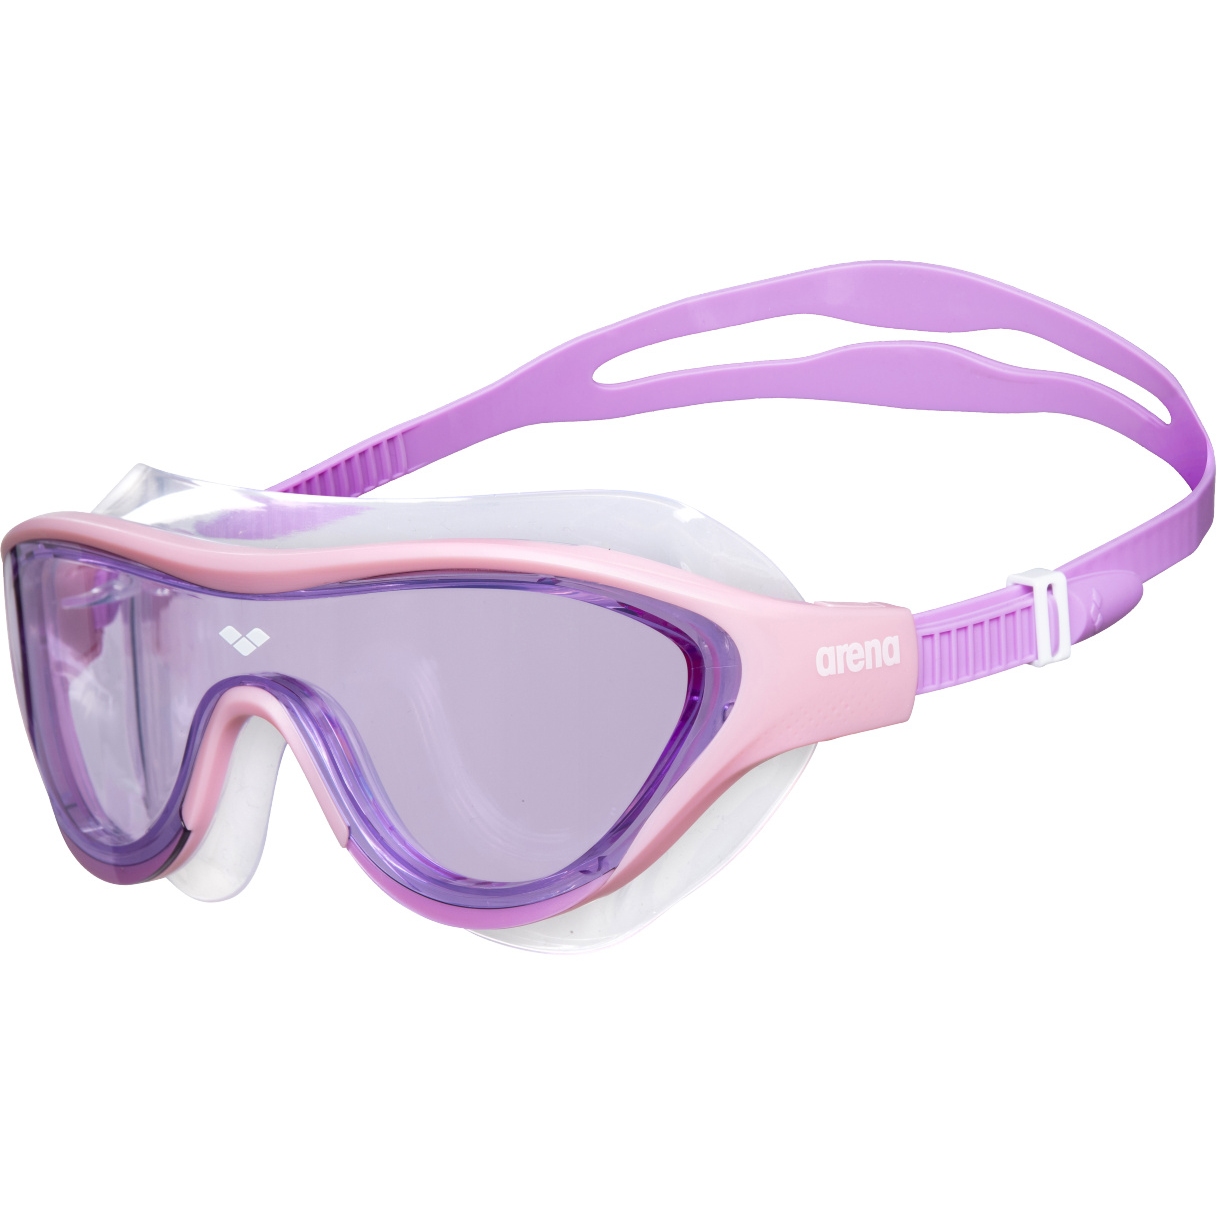 Image of arena The One Mask JR Junior Swimming Goggles - Pink-Pink-Violet